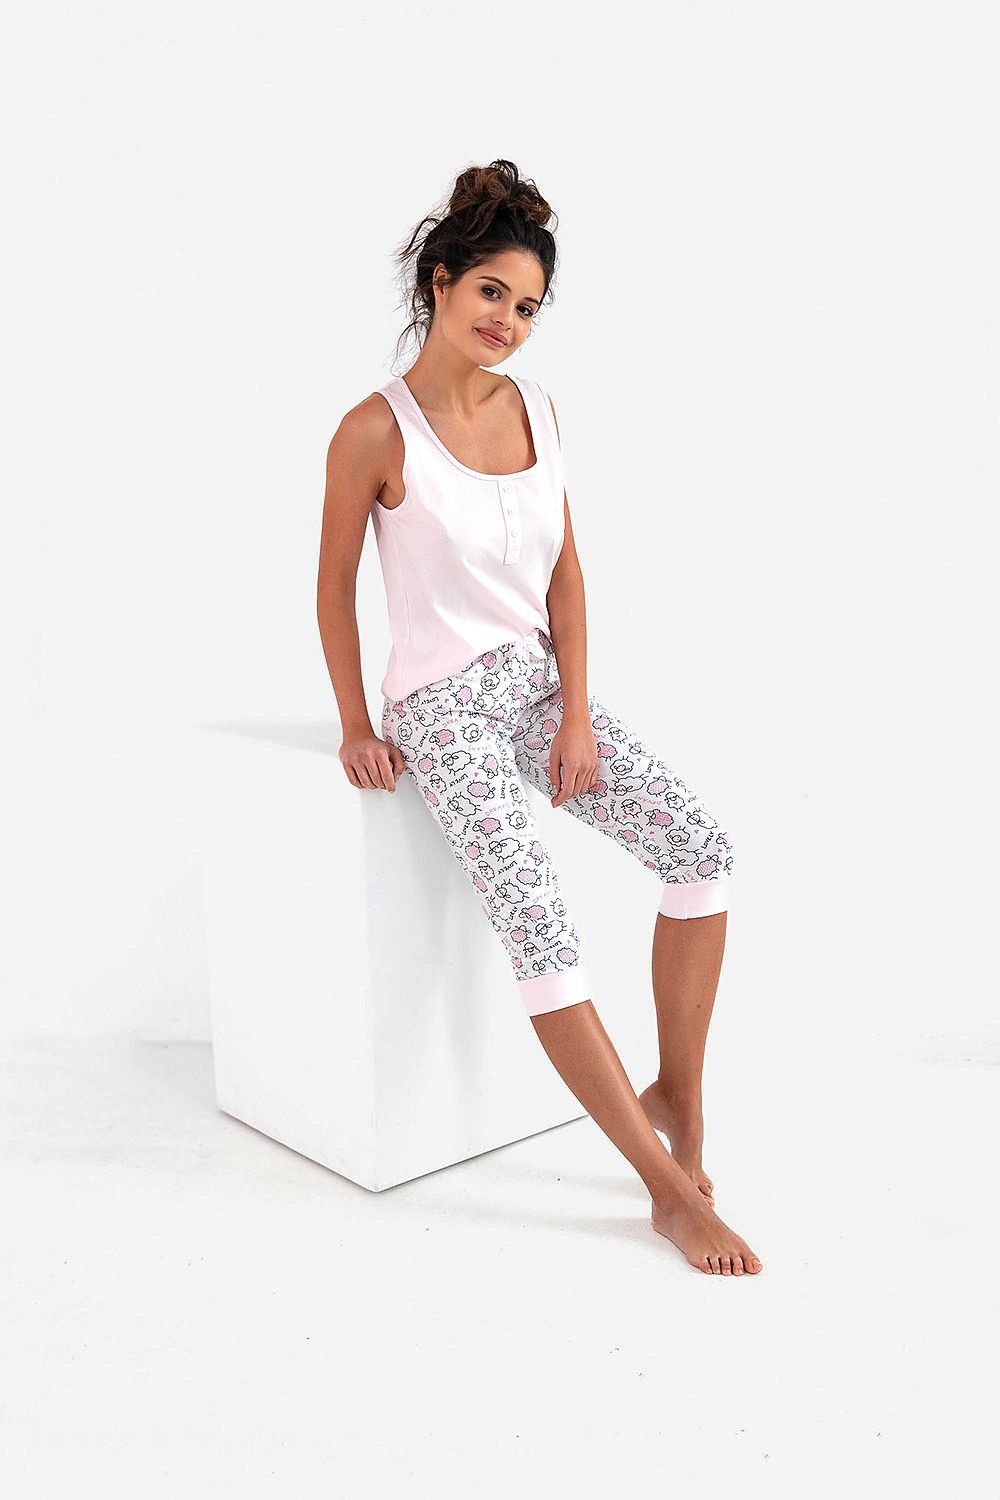 Pyjama set - M&H FashionPyjama setM&H FashionM&H Fashion178583_10533315902921433767LPyjama SensisM&H FashionM&H FashionWomen's pajamas sewn from soft and airy cotton in light pink and patterned pants. Cotton shirt in a solid color on wide straps, round neckline, buttoned. To completePyjama set